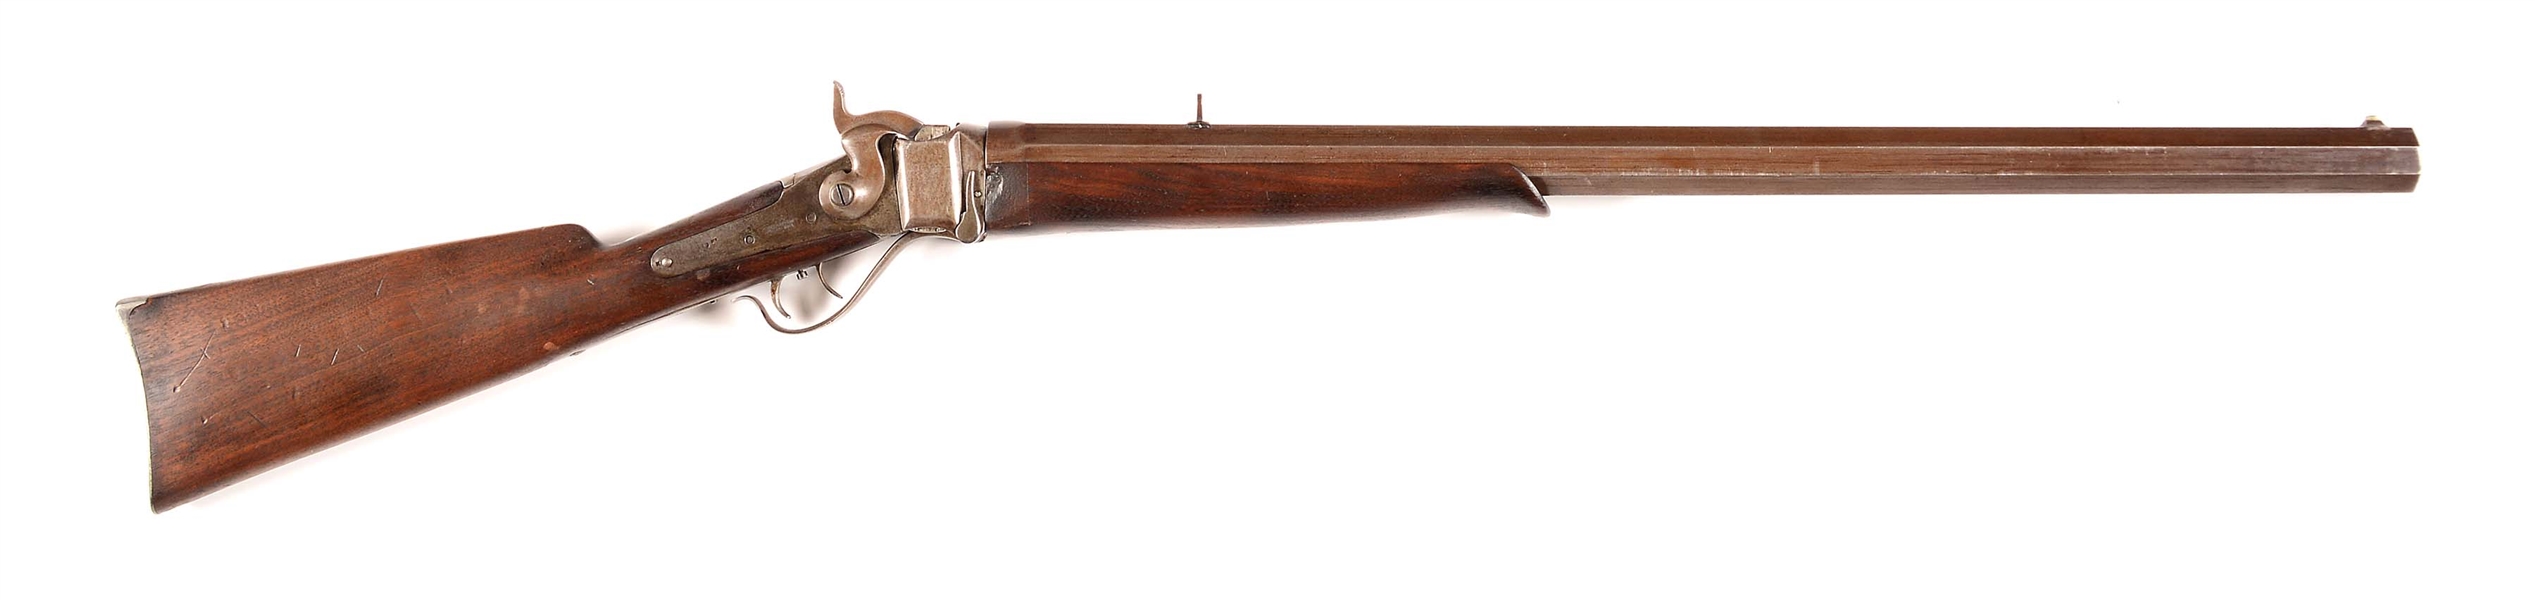 (A) ATTRIBUTED MEACHAM CONVERSION SHARPS "OLD RELIABLE" SINGLE SHOT RIFLE 